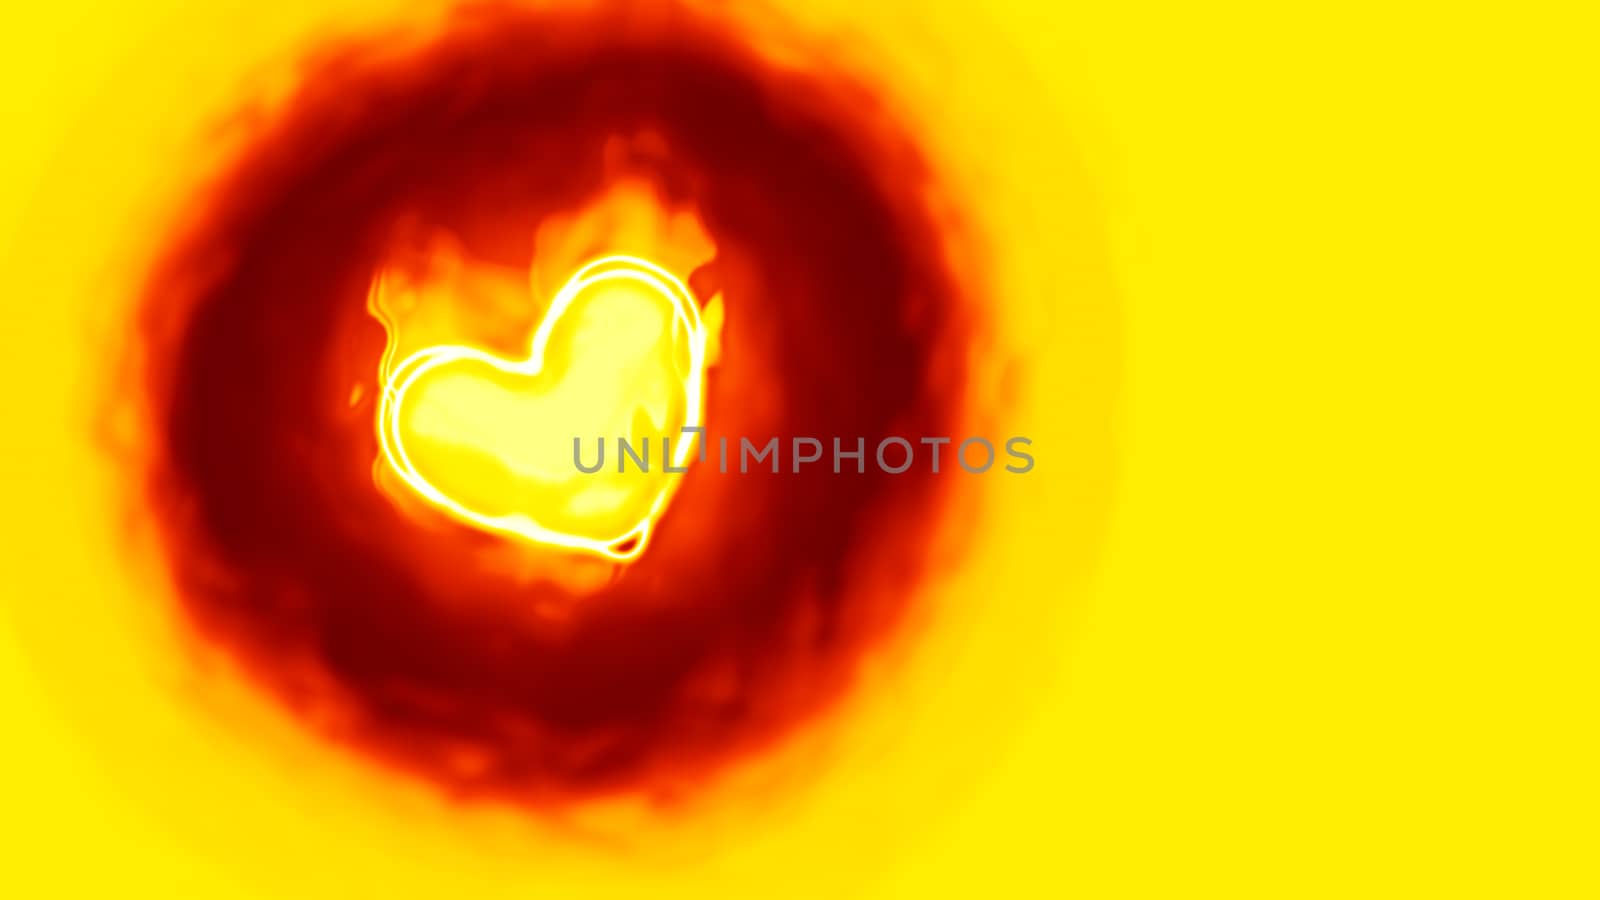 An illustration of a heart in flames background